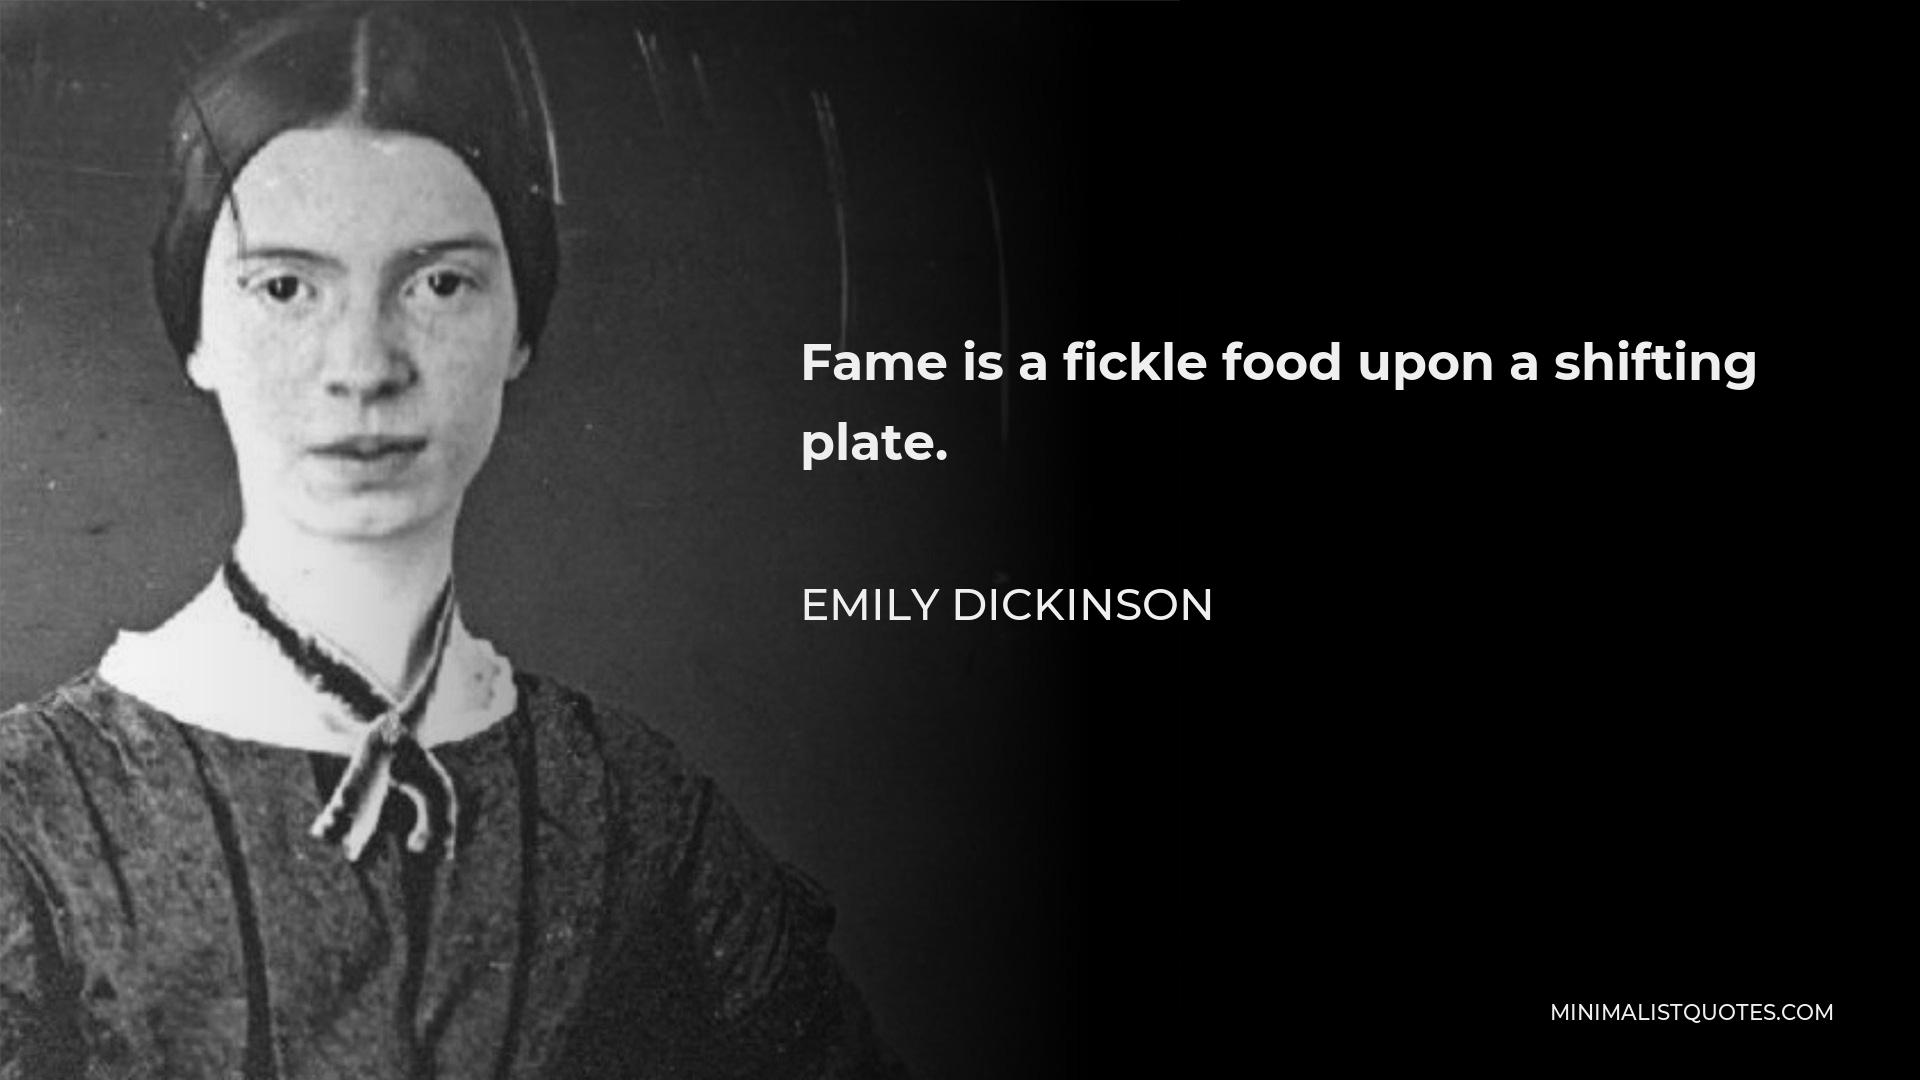 Emily Dickinson Quote - Fame is a fickle food upon a shifting plate.